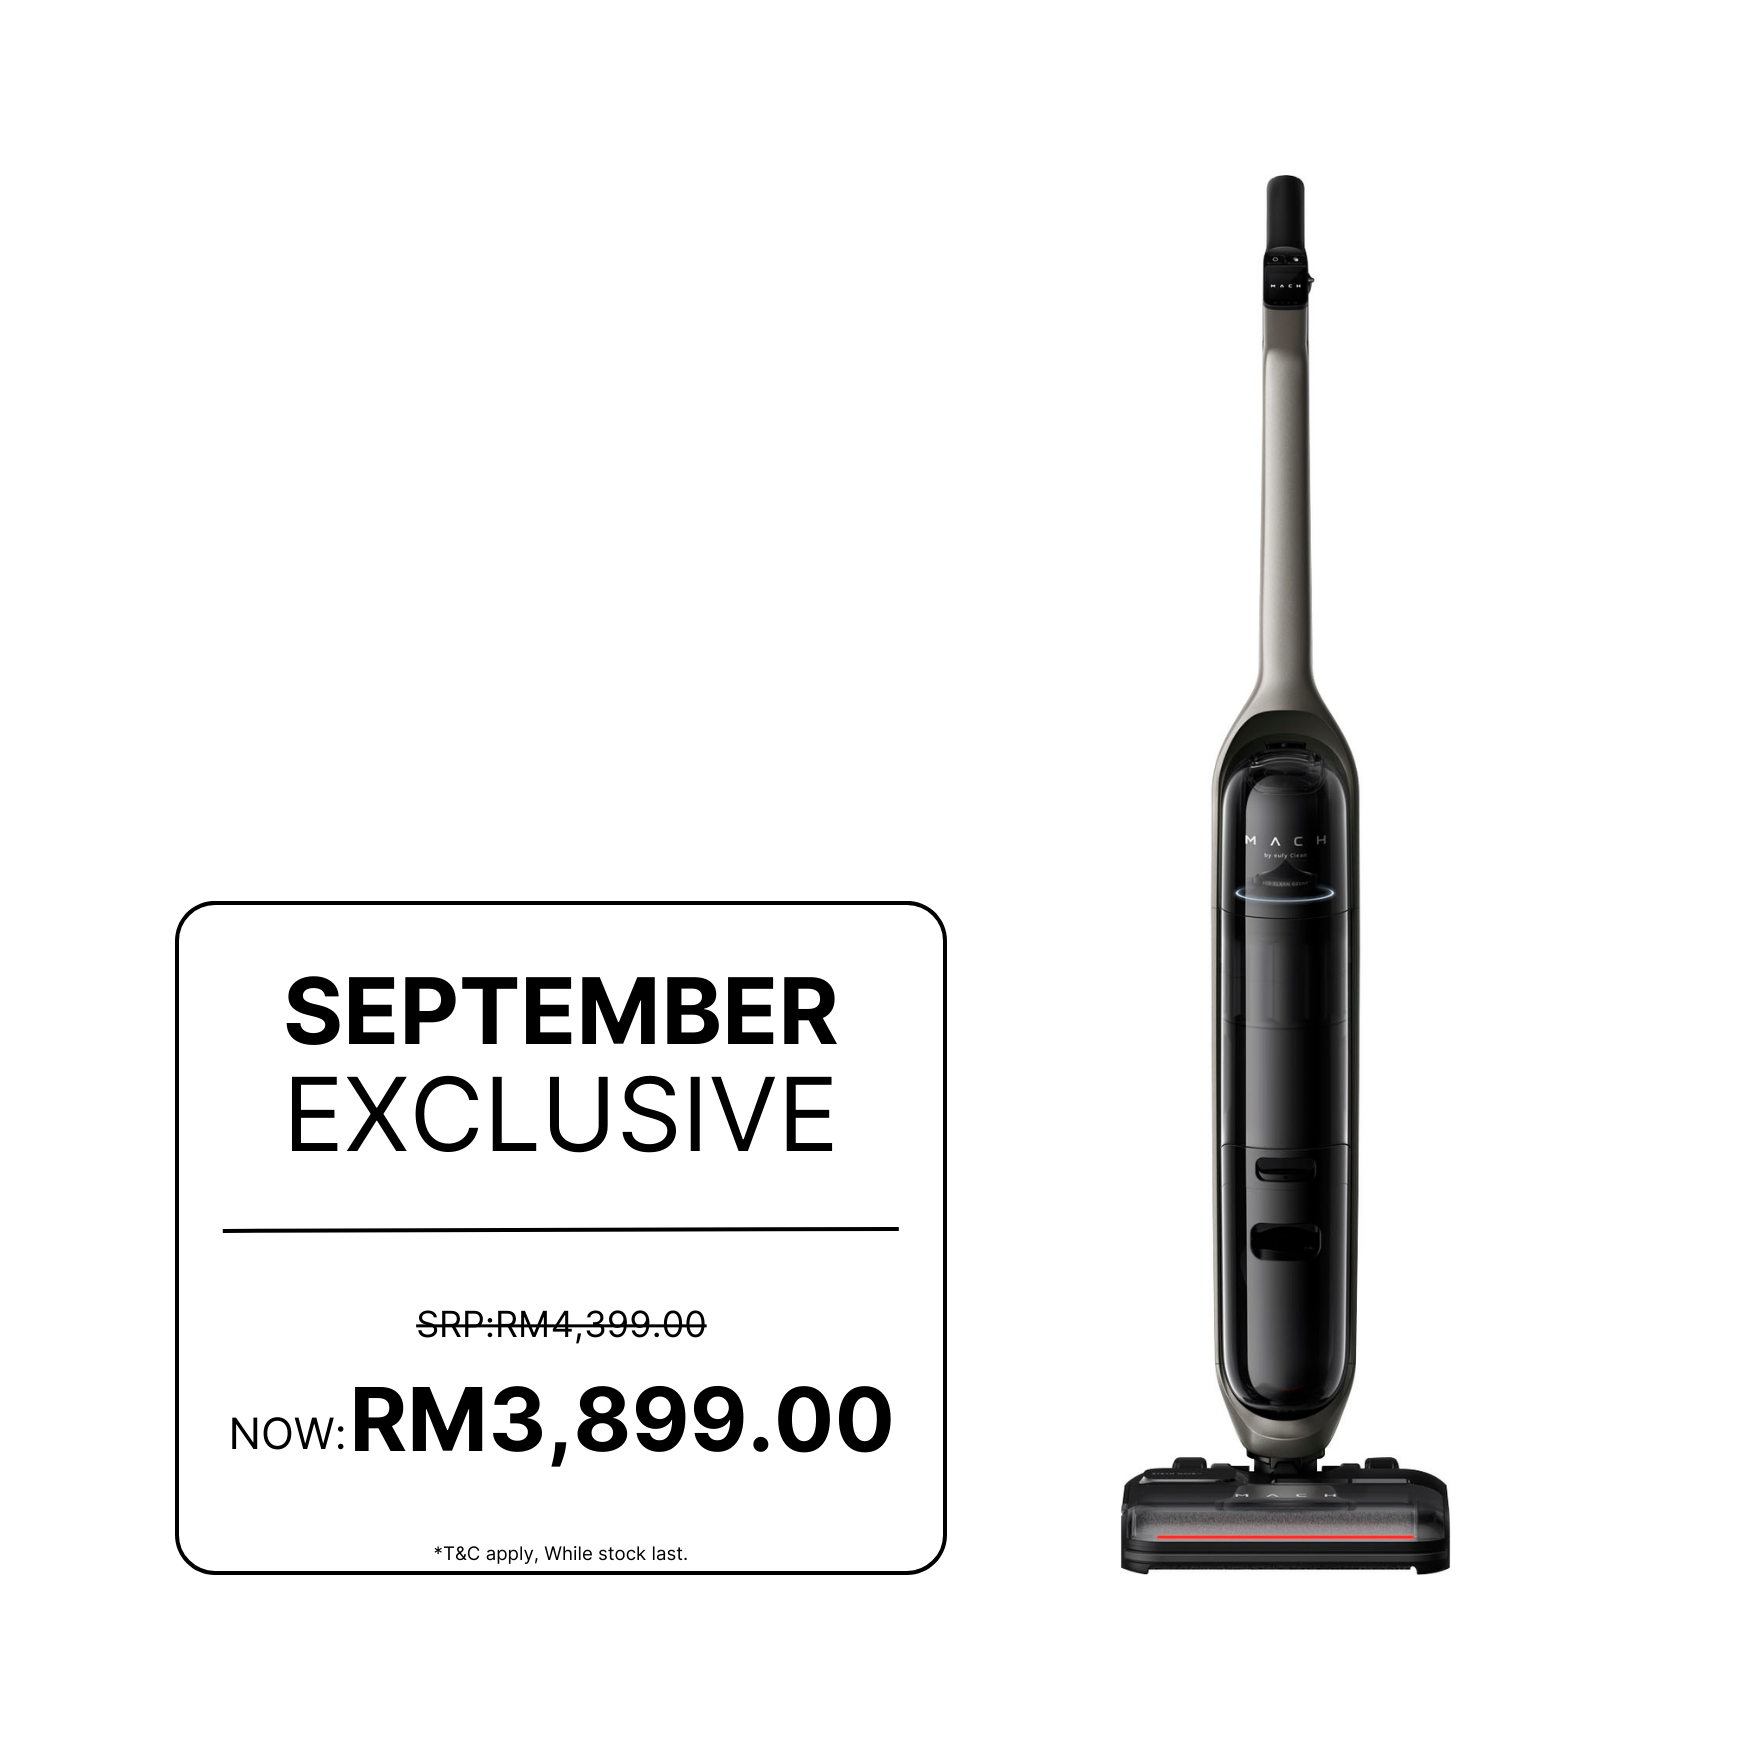 [SEPTEMBER EXCLUSIVE] Anker MACH V1 Ultra Vacuum l 16,800 Pa Ultra-Powerful Suction l All-in-one design for complete floor cleaning